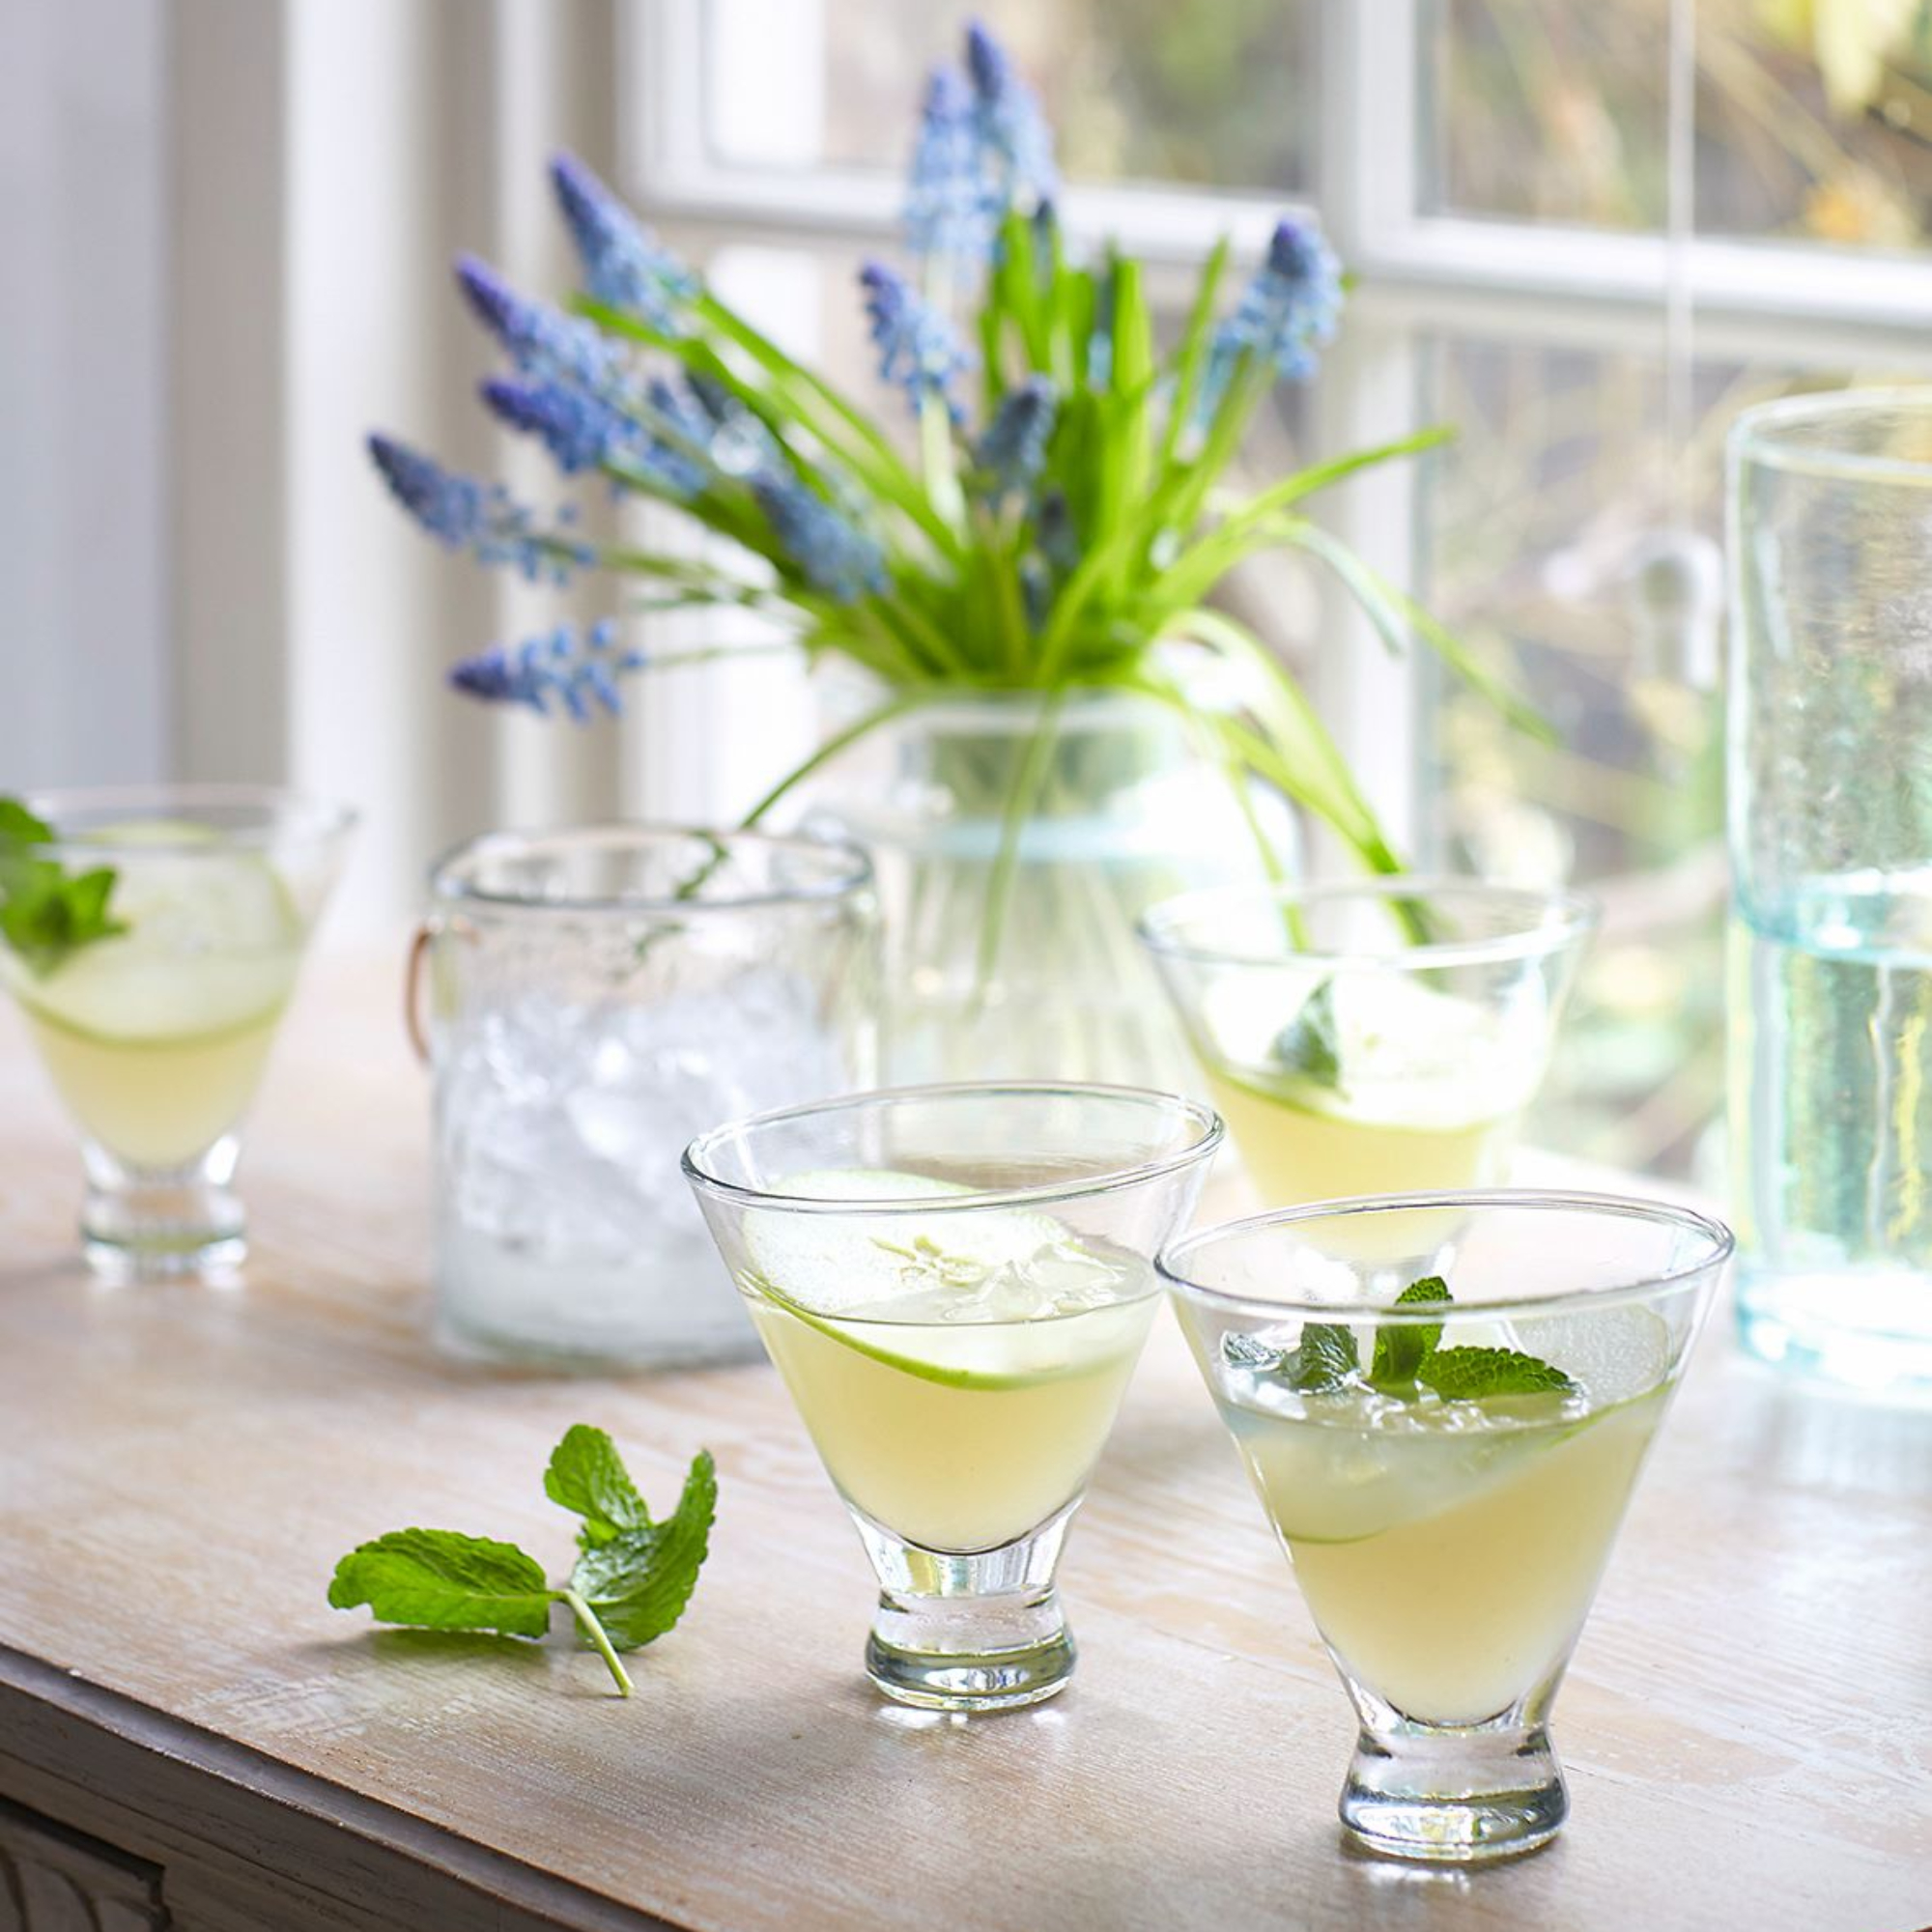 Apple and Elderflower Martini drinks on a wooden table was a glass vase of flowers in front of a window